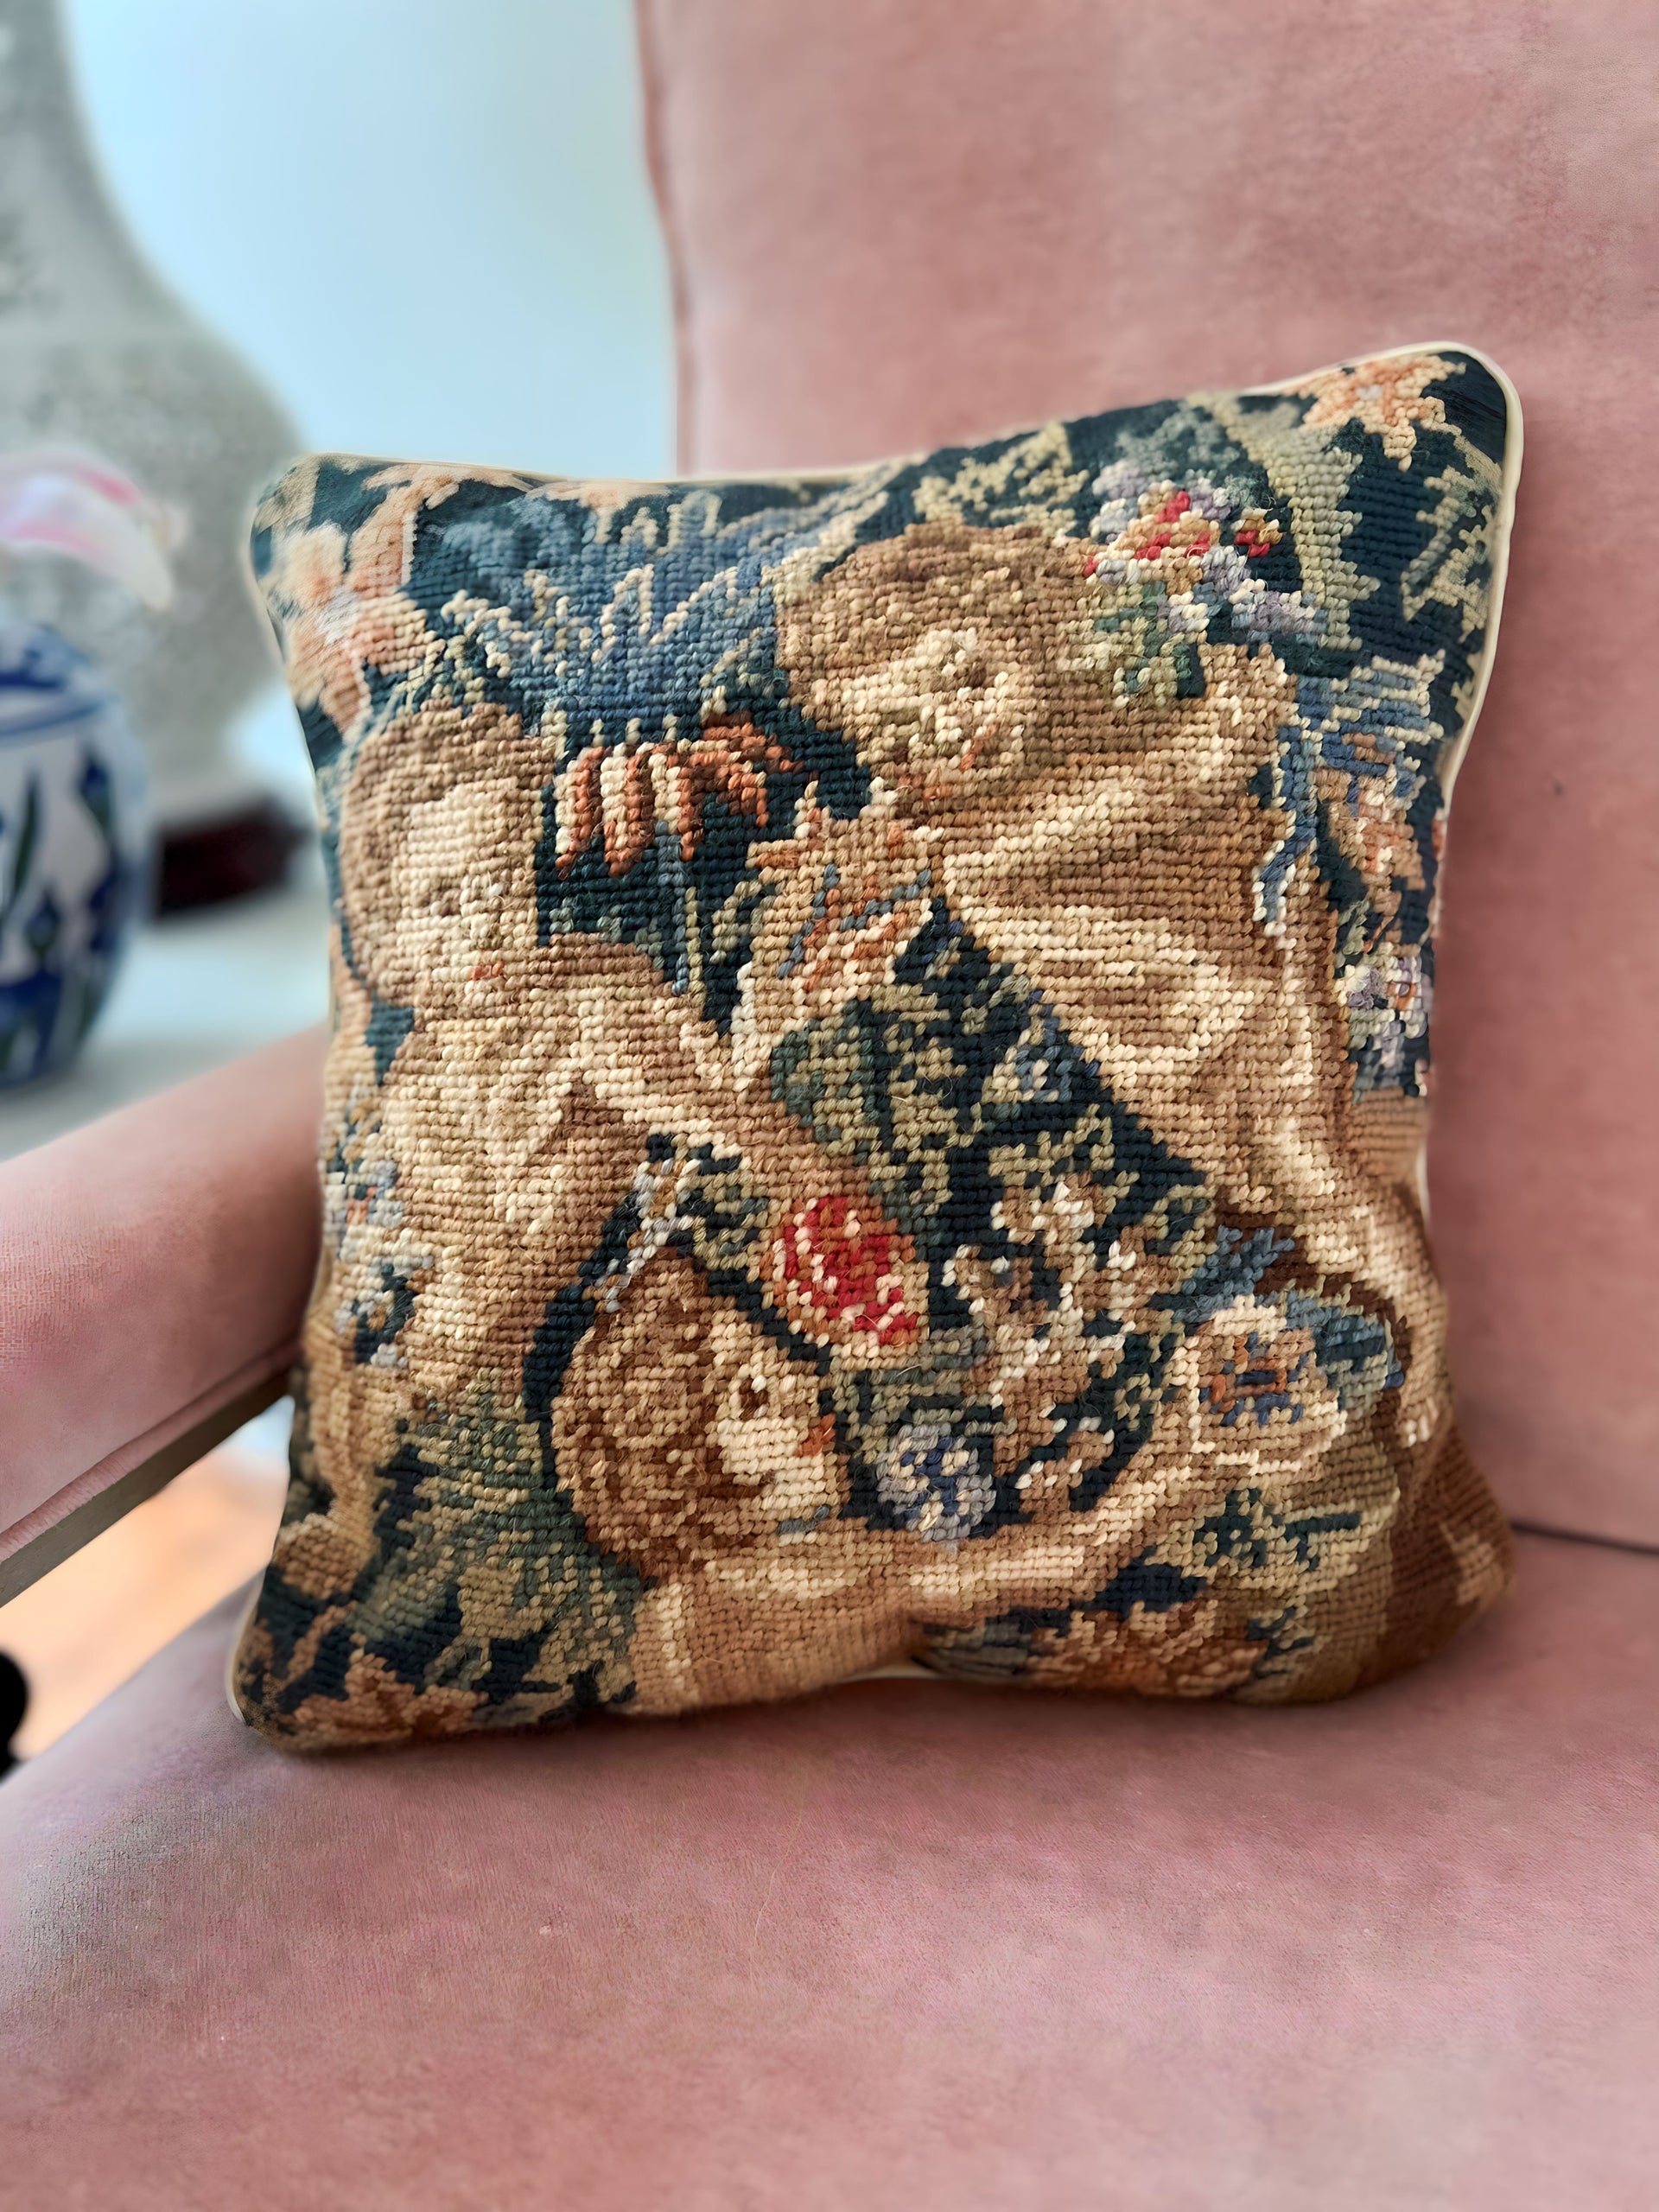 Hand-crafted Needlepoint pillows 10